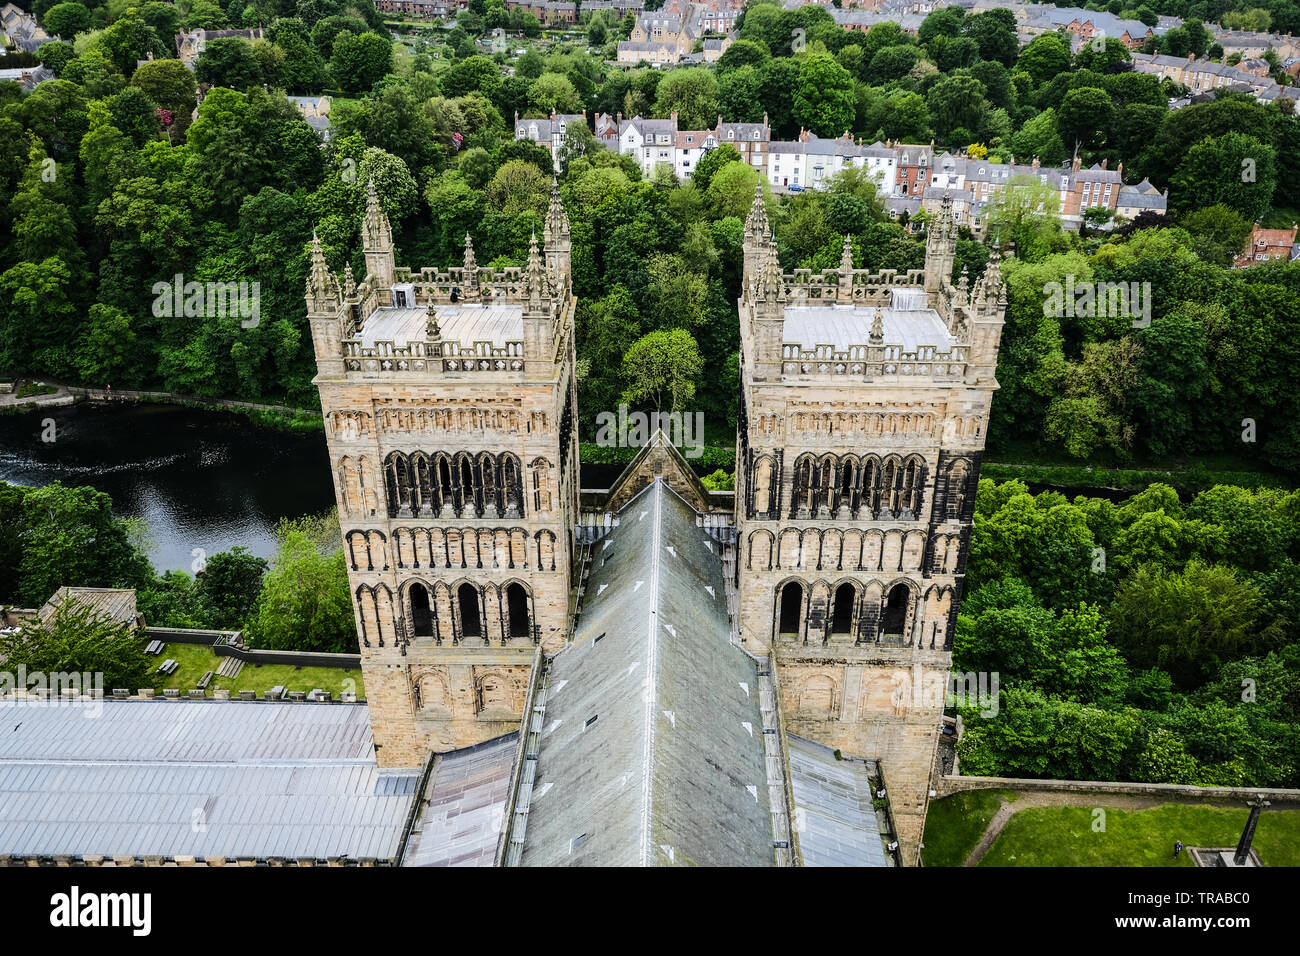 View of Durham, England, from the top of the Central Tower at Durham Cathedral Stock Photo